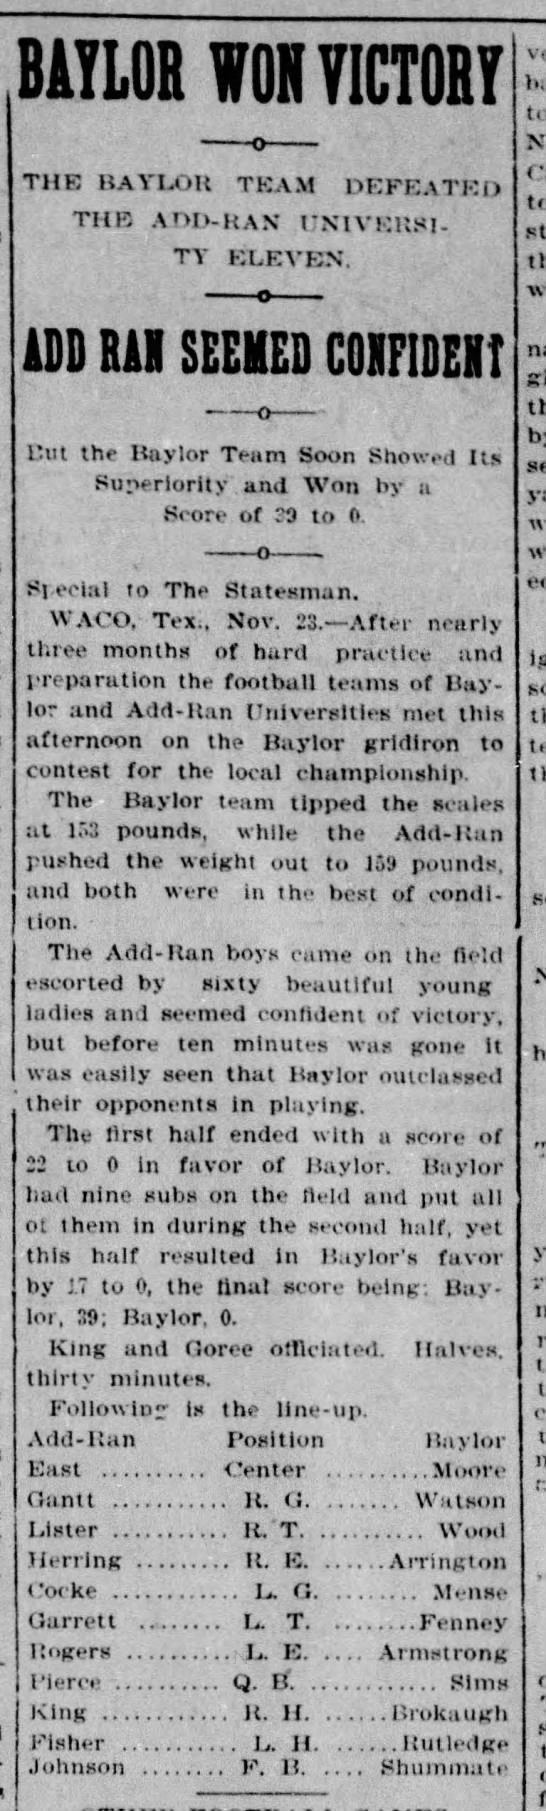 Baylor Won Victory: The Baylor Team Defeated the Add-Ran University Eleven - 